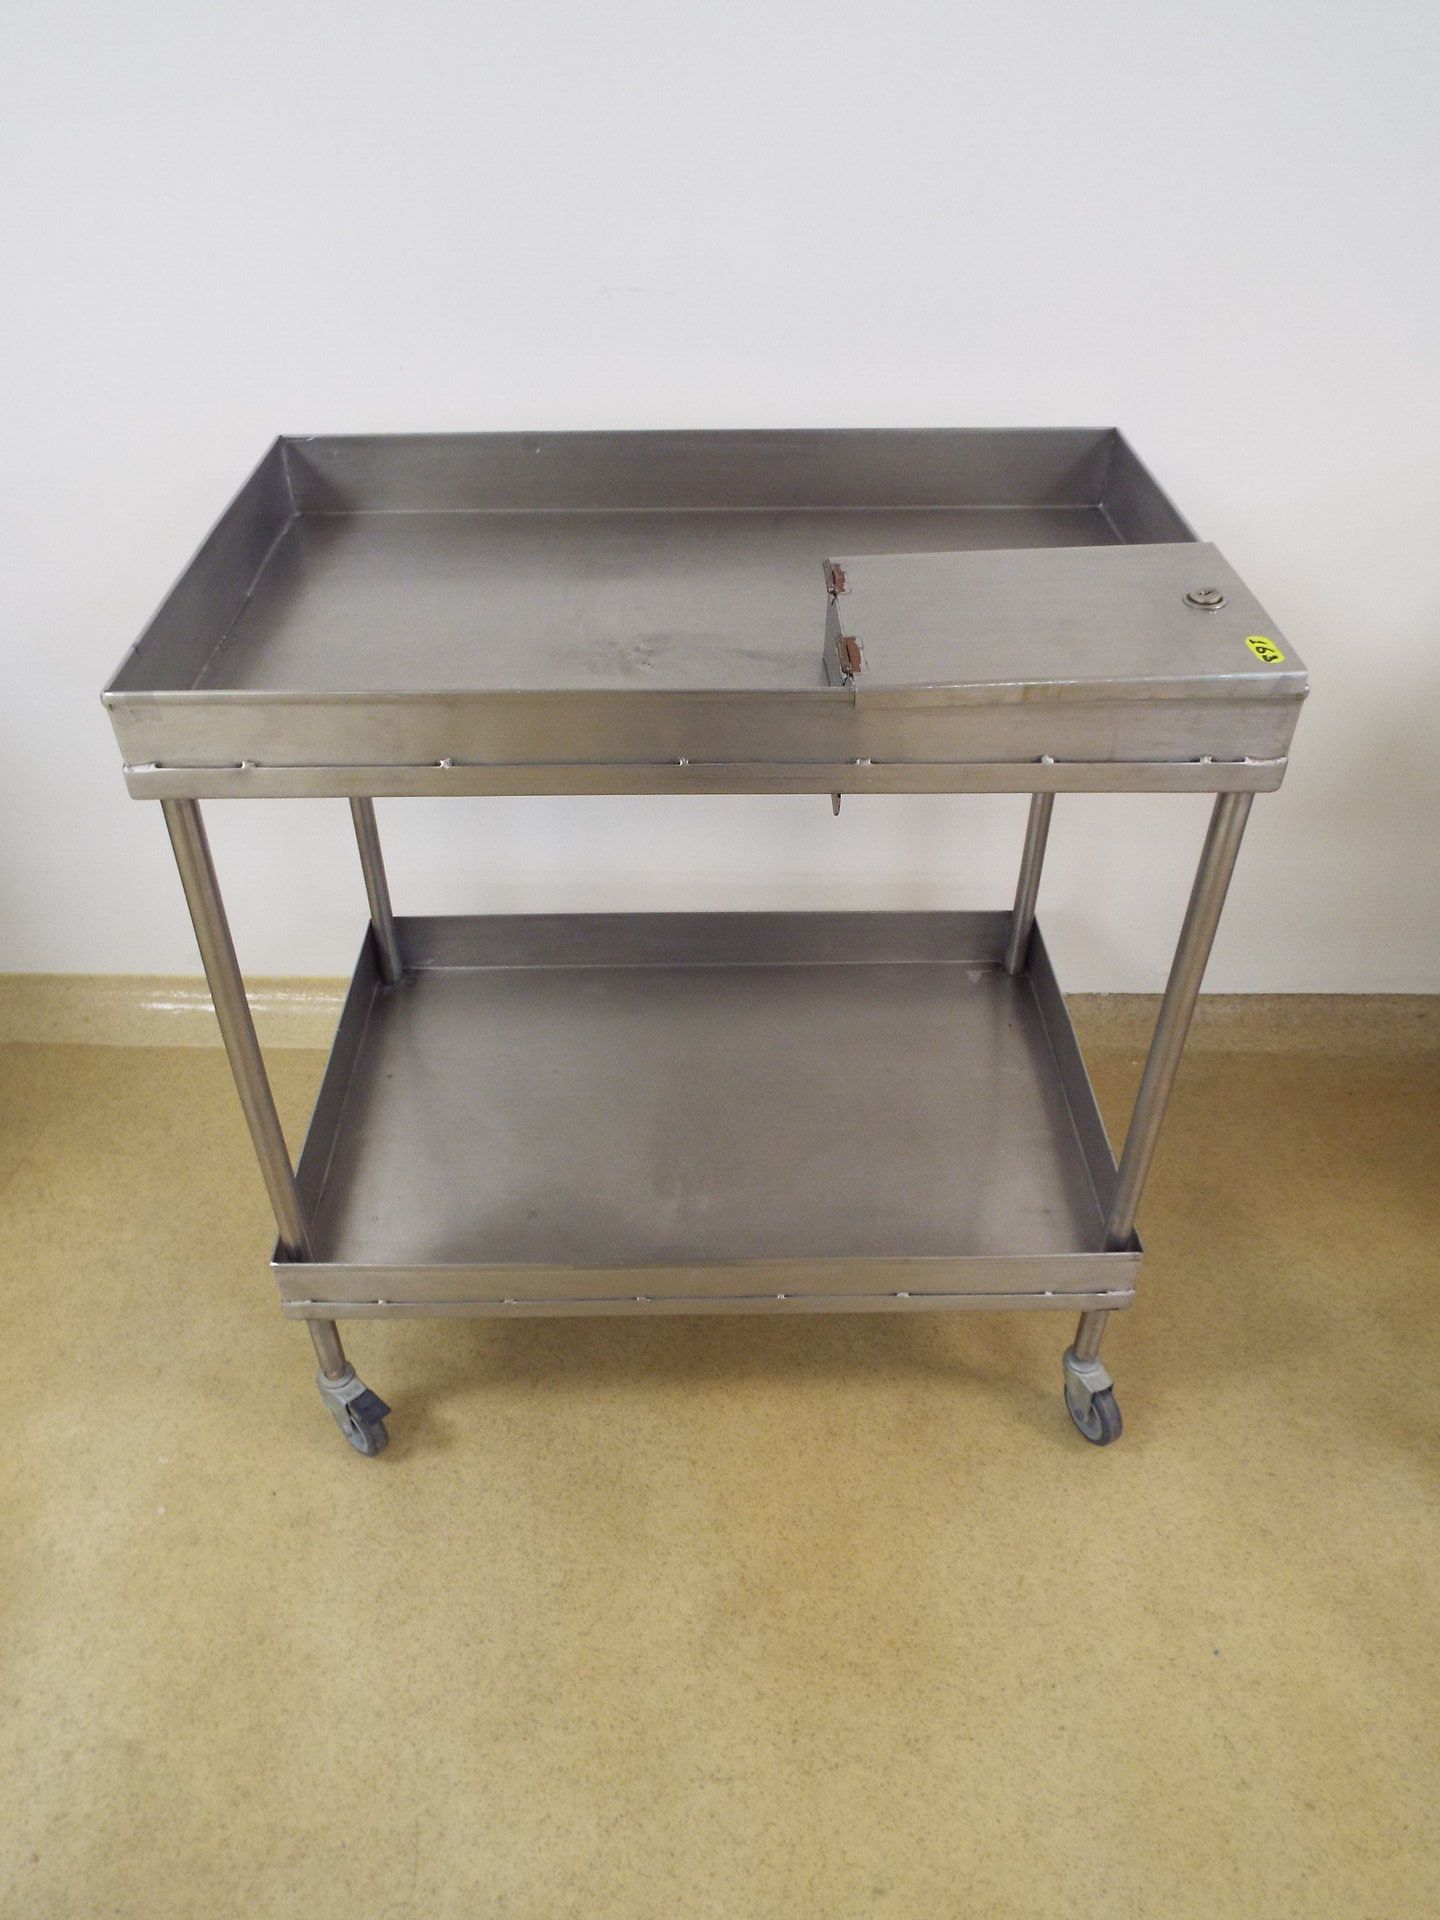 Stainless Steel cart with 2 shelves and one keyed compartment on top